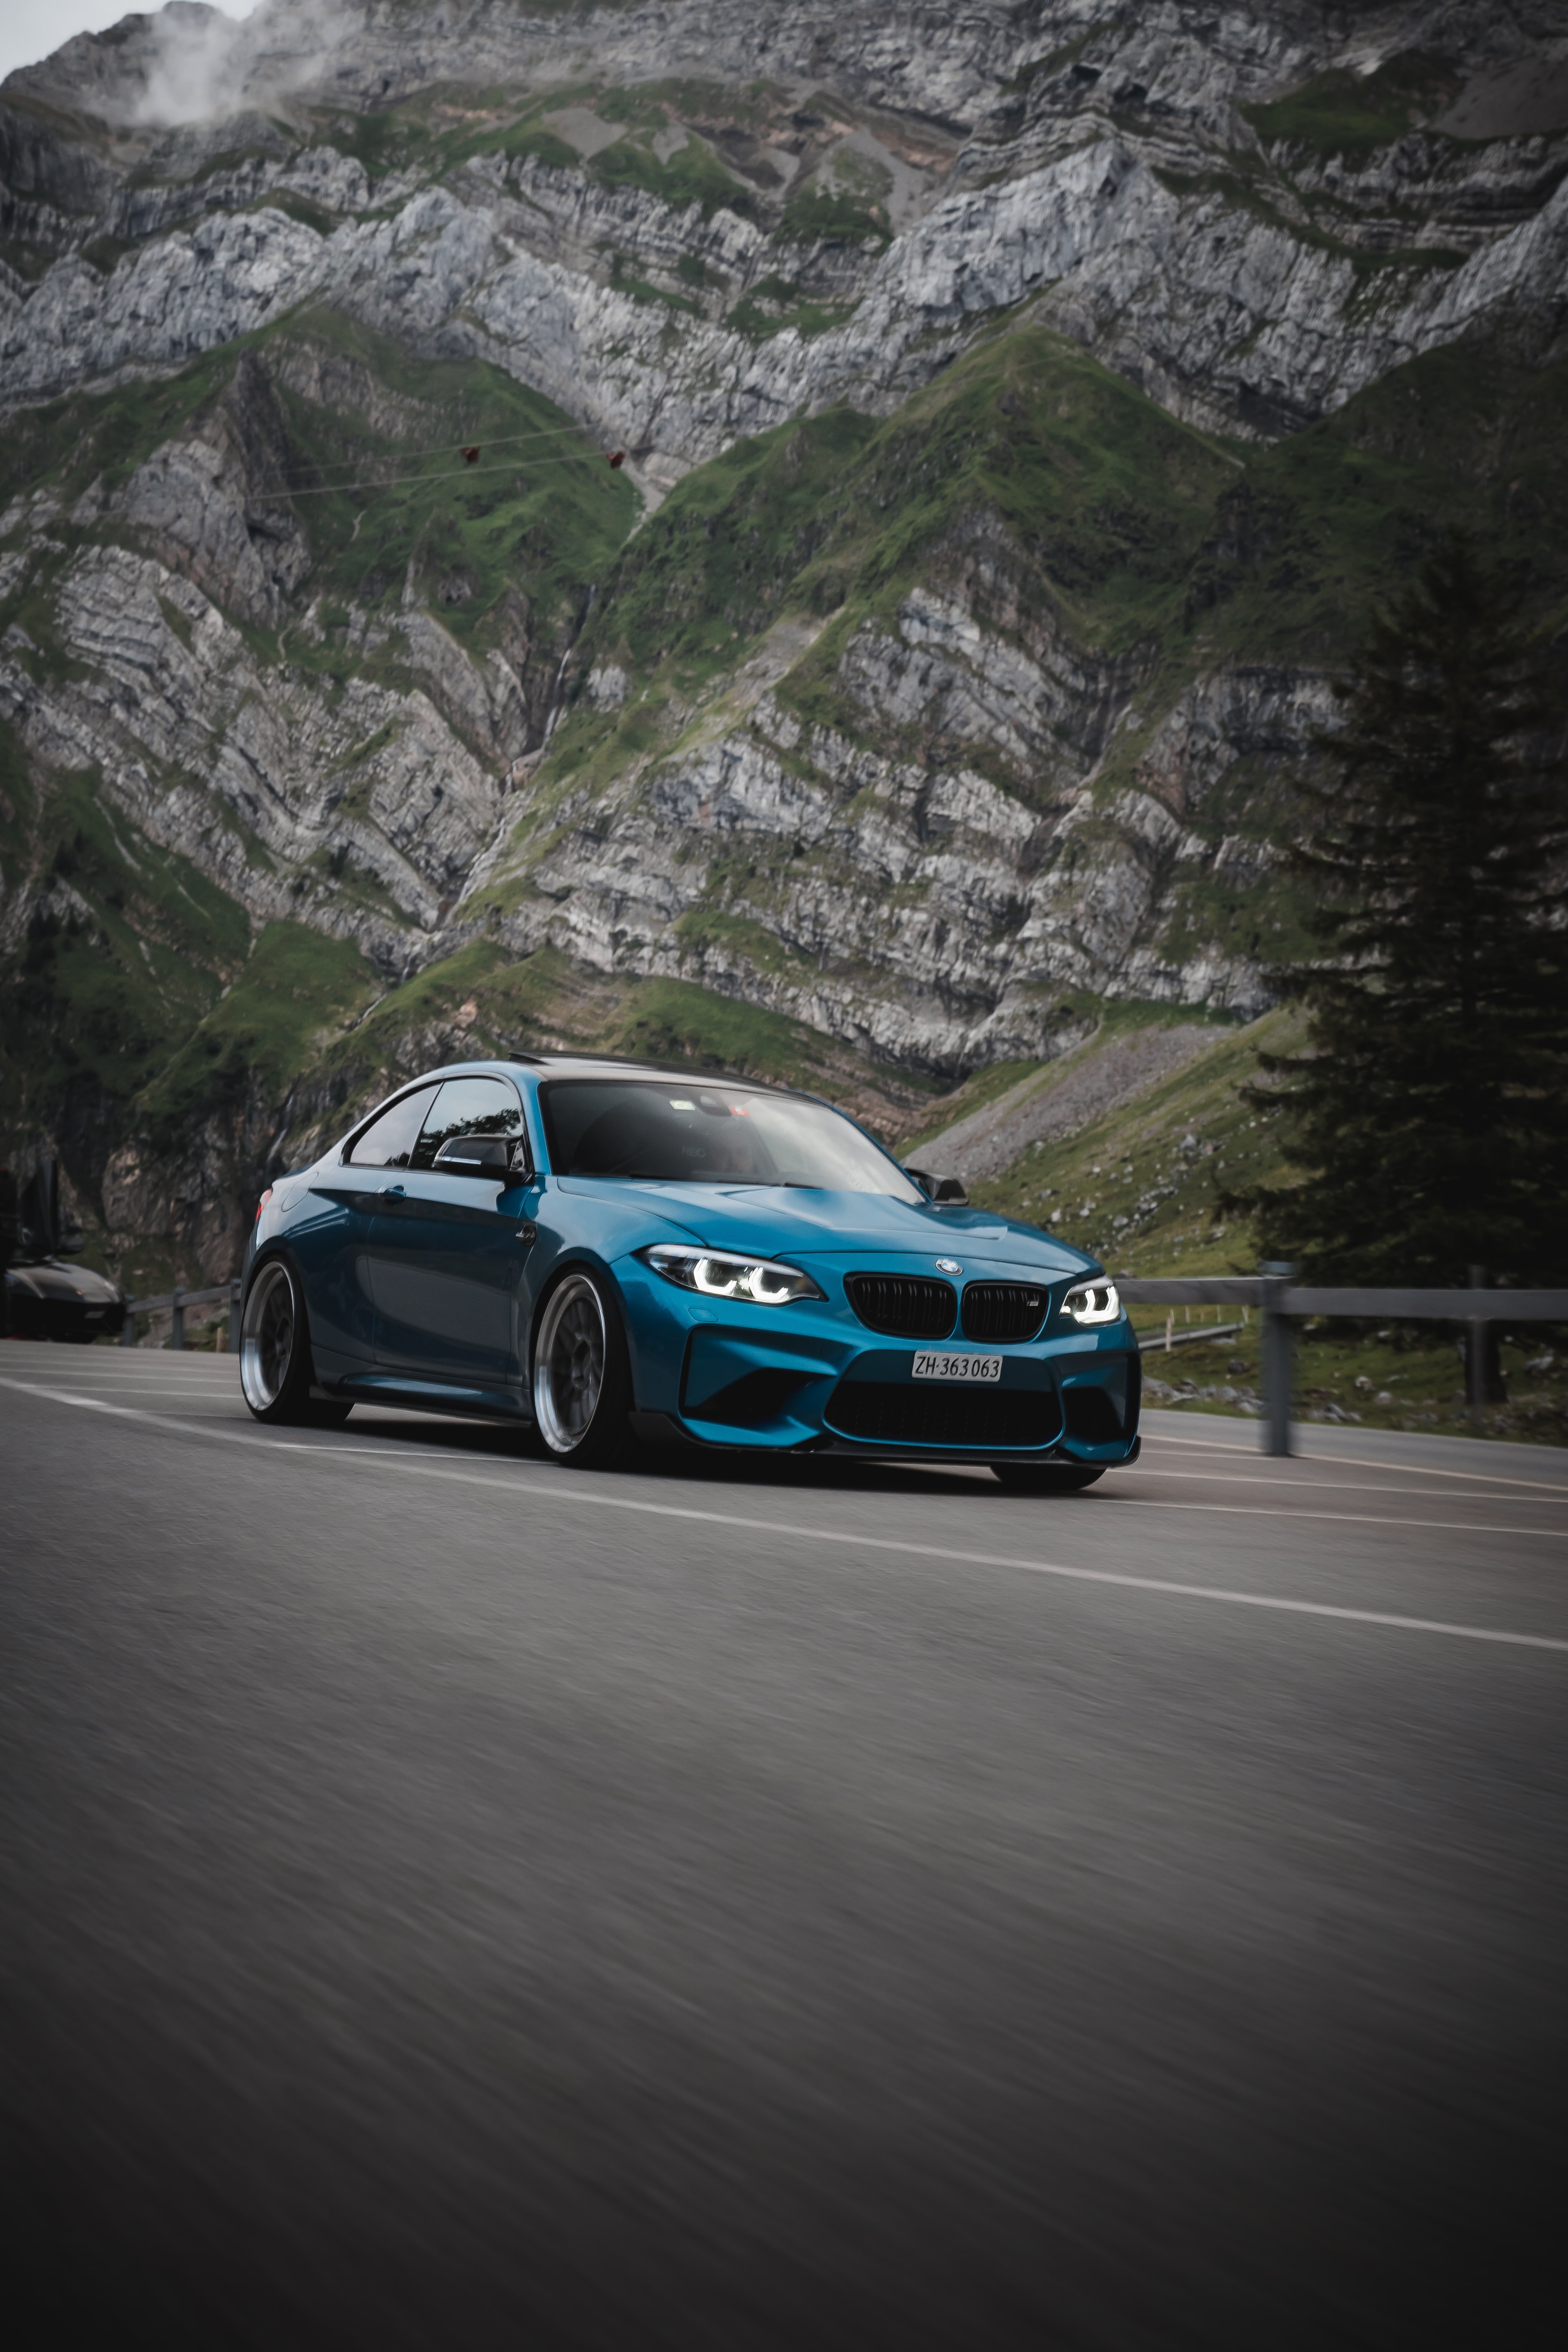 bmw, cars, rock, road, car, side view 1080p